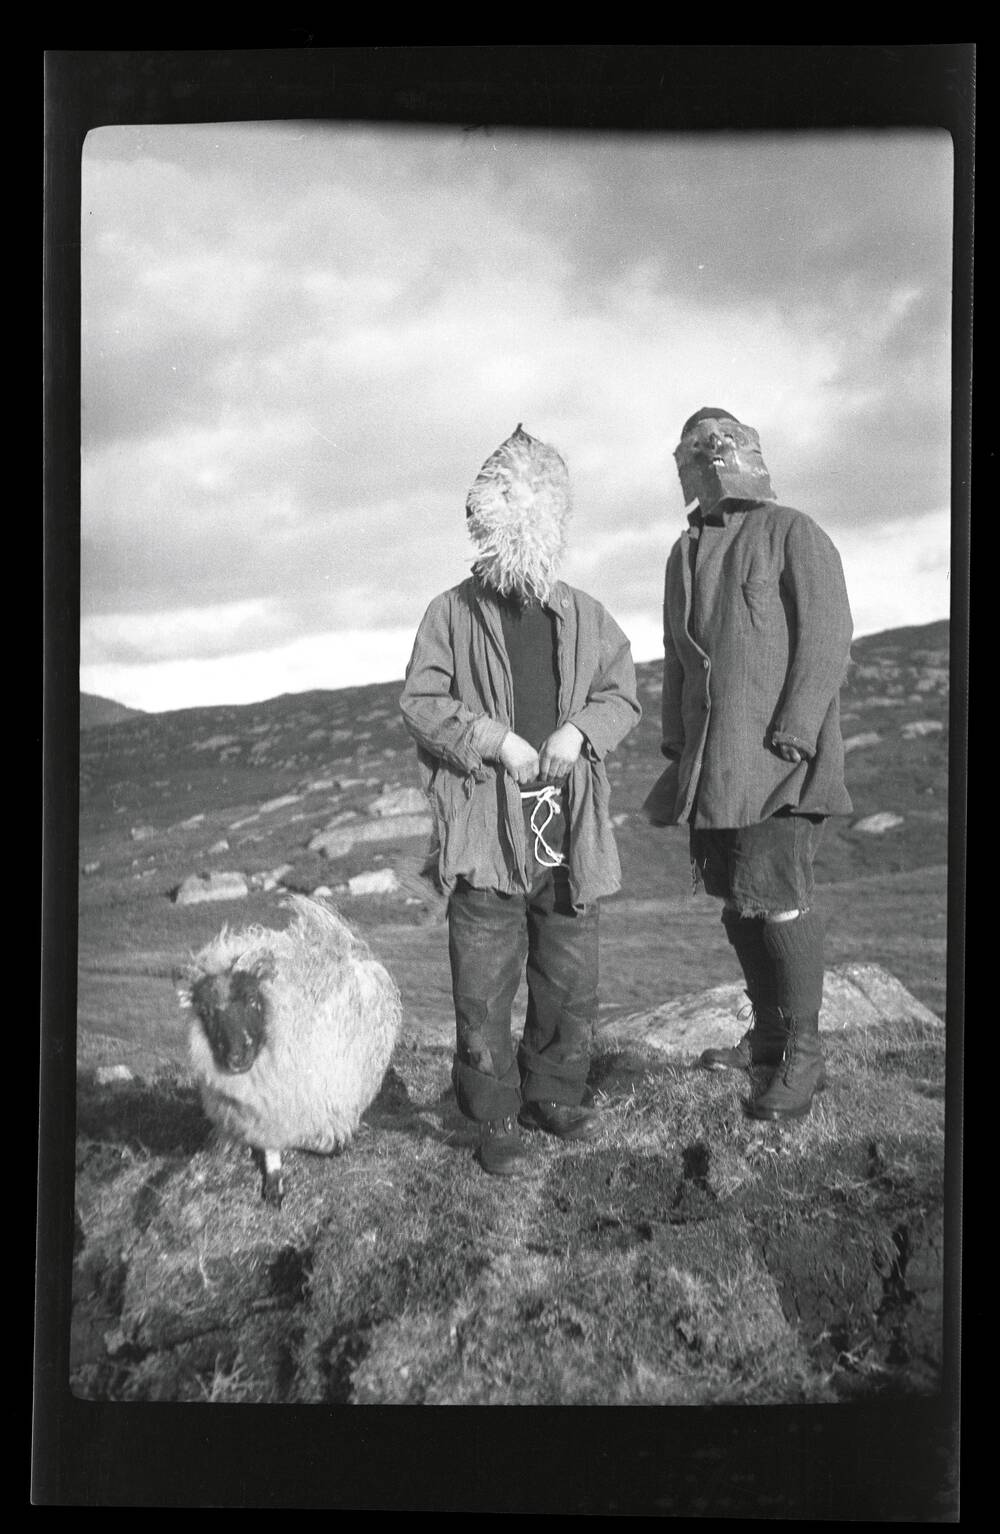 A black and white photograph of two figures standing in a boulder-strewn field, next to a large sheep. Both boys wear costumes. The one on the left wears a round piece of sheep fleece completely covering his face. The boy on the right has a crudely shaped metal mask.